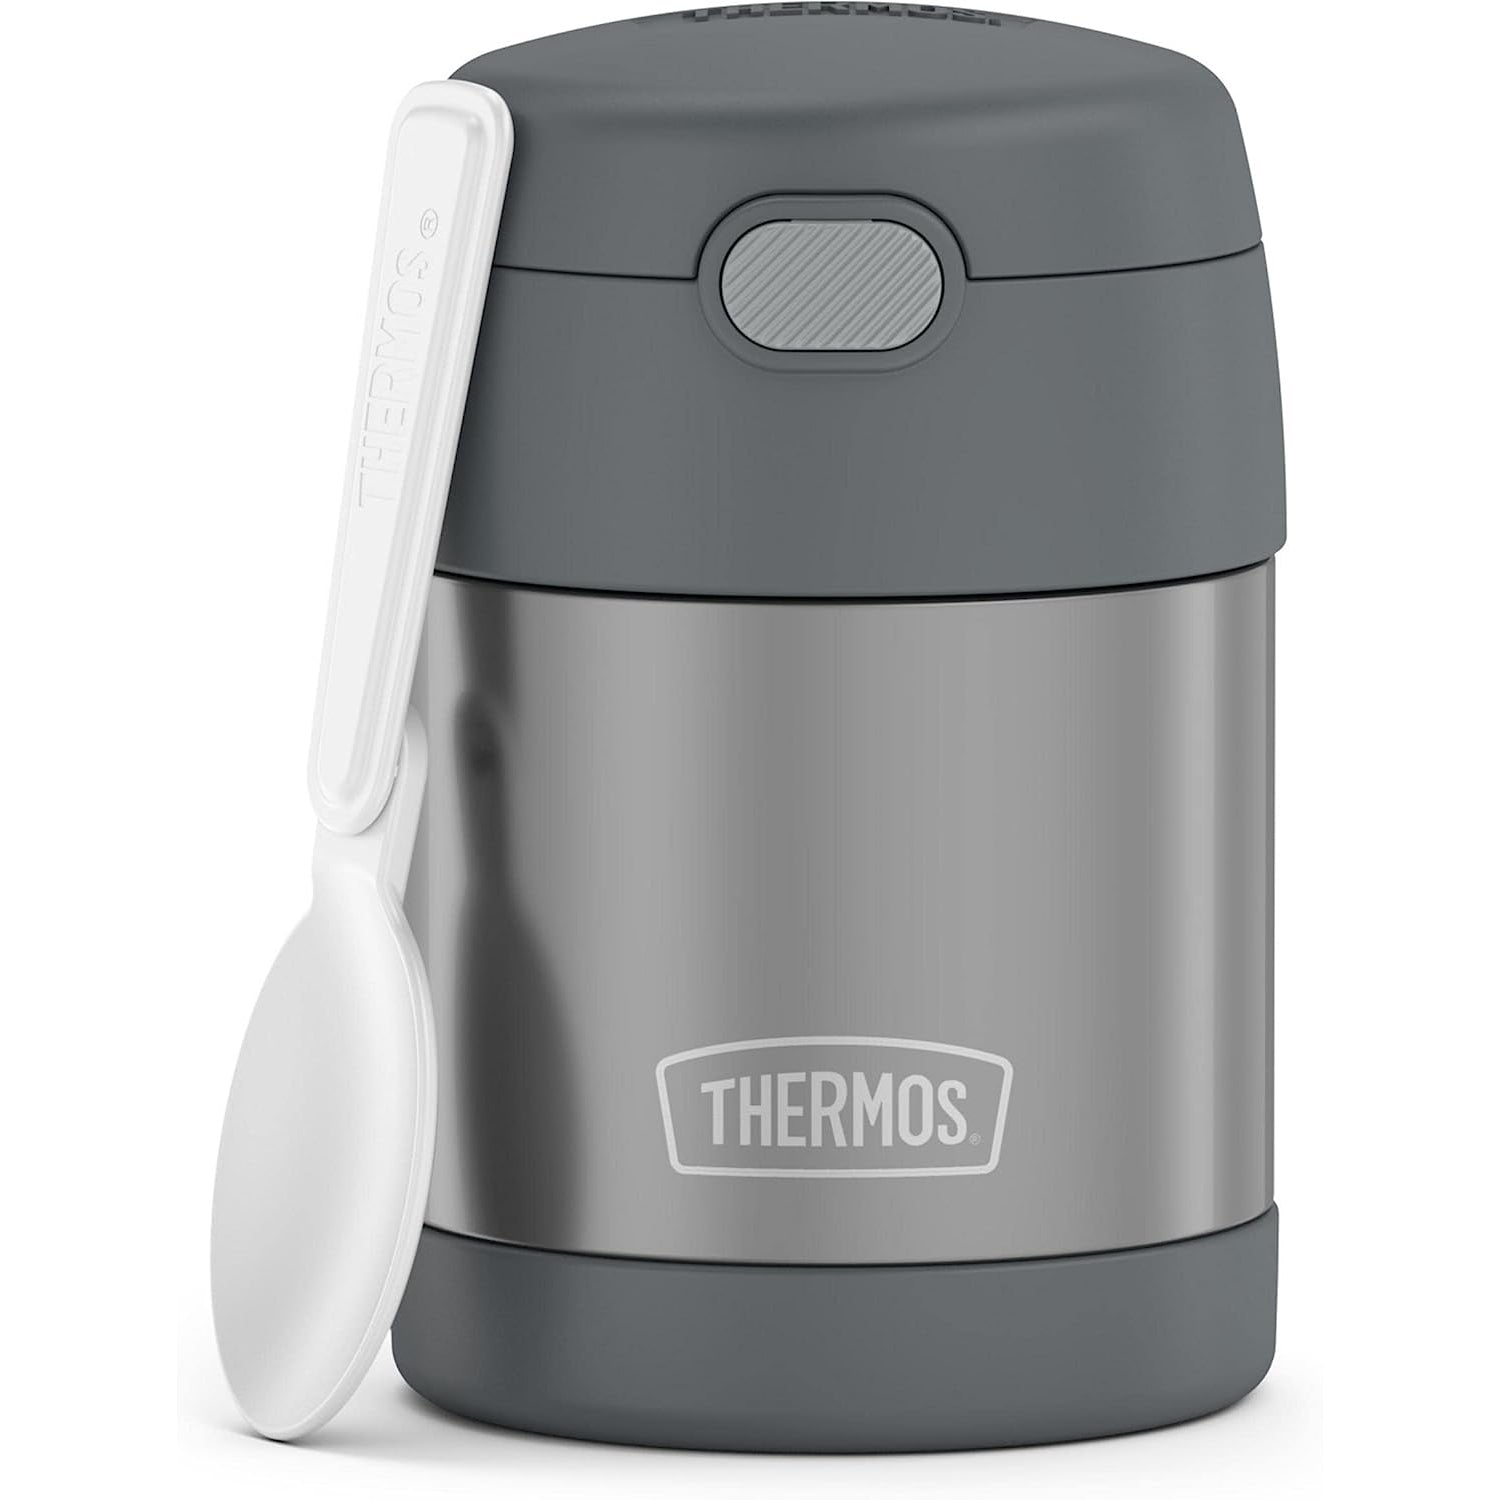 THERMOS FUNTAINER 10 Ounce Stainless Steel Vacuum Insulated Kids Food Jar with Folding Spoon, Grey